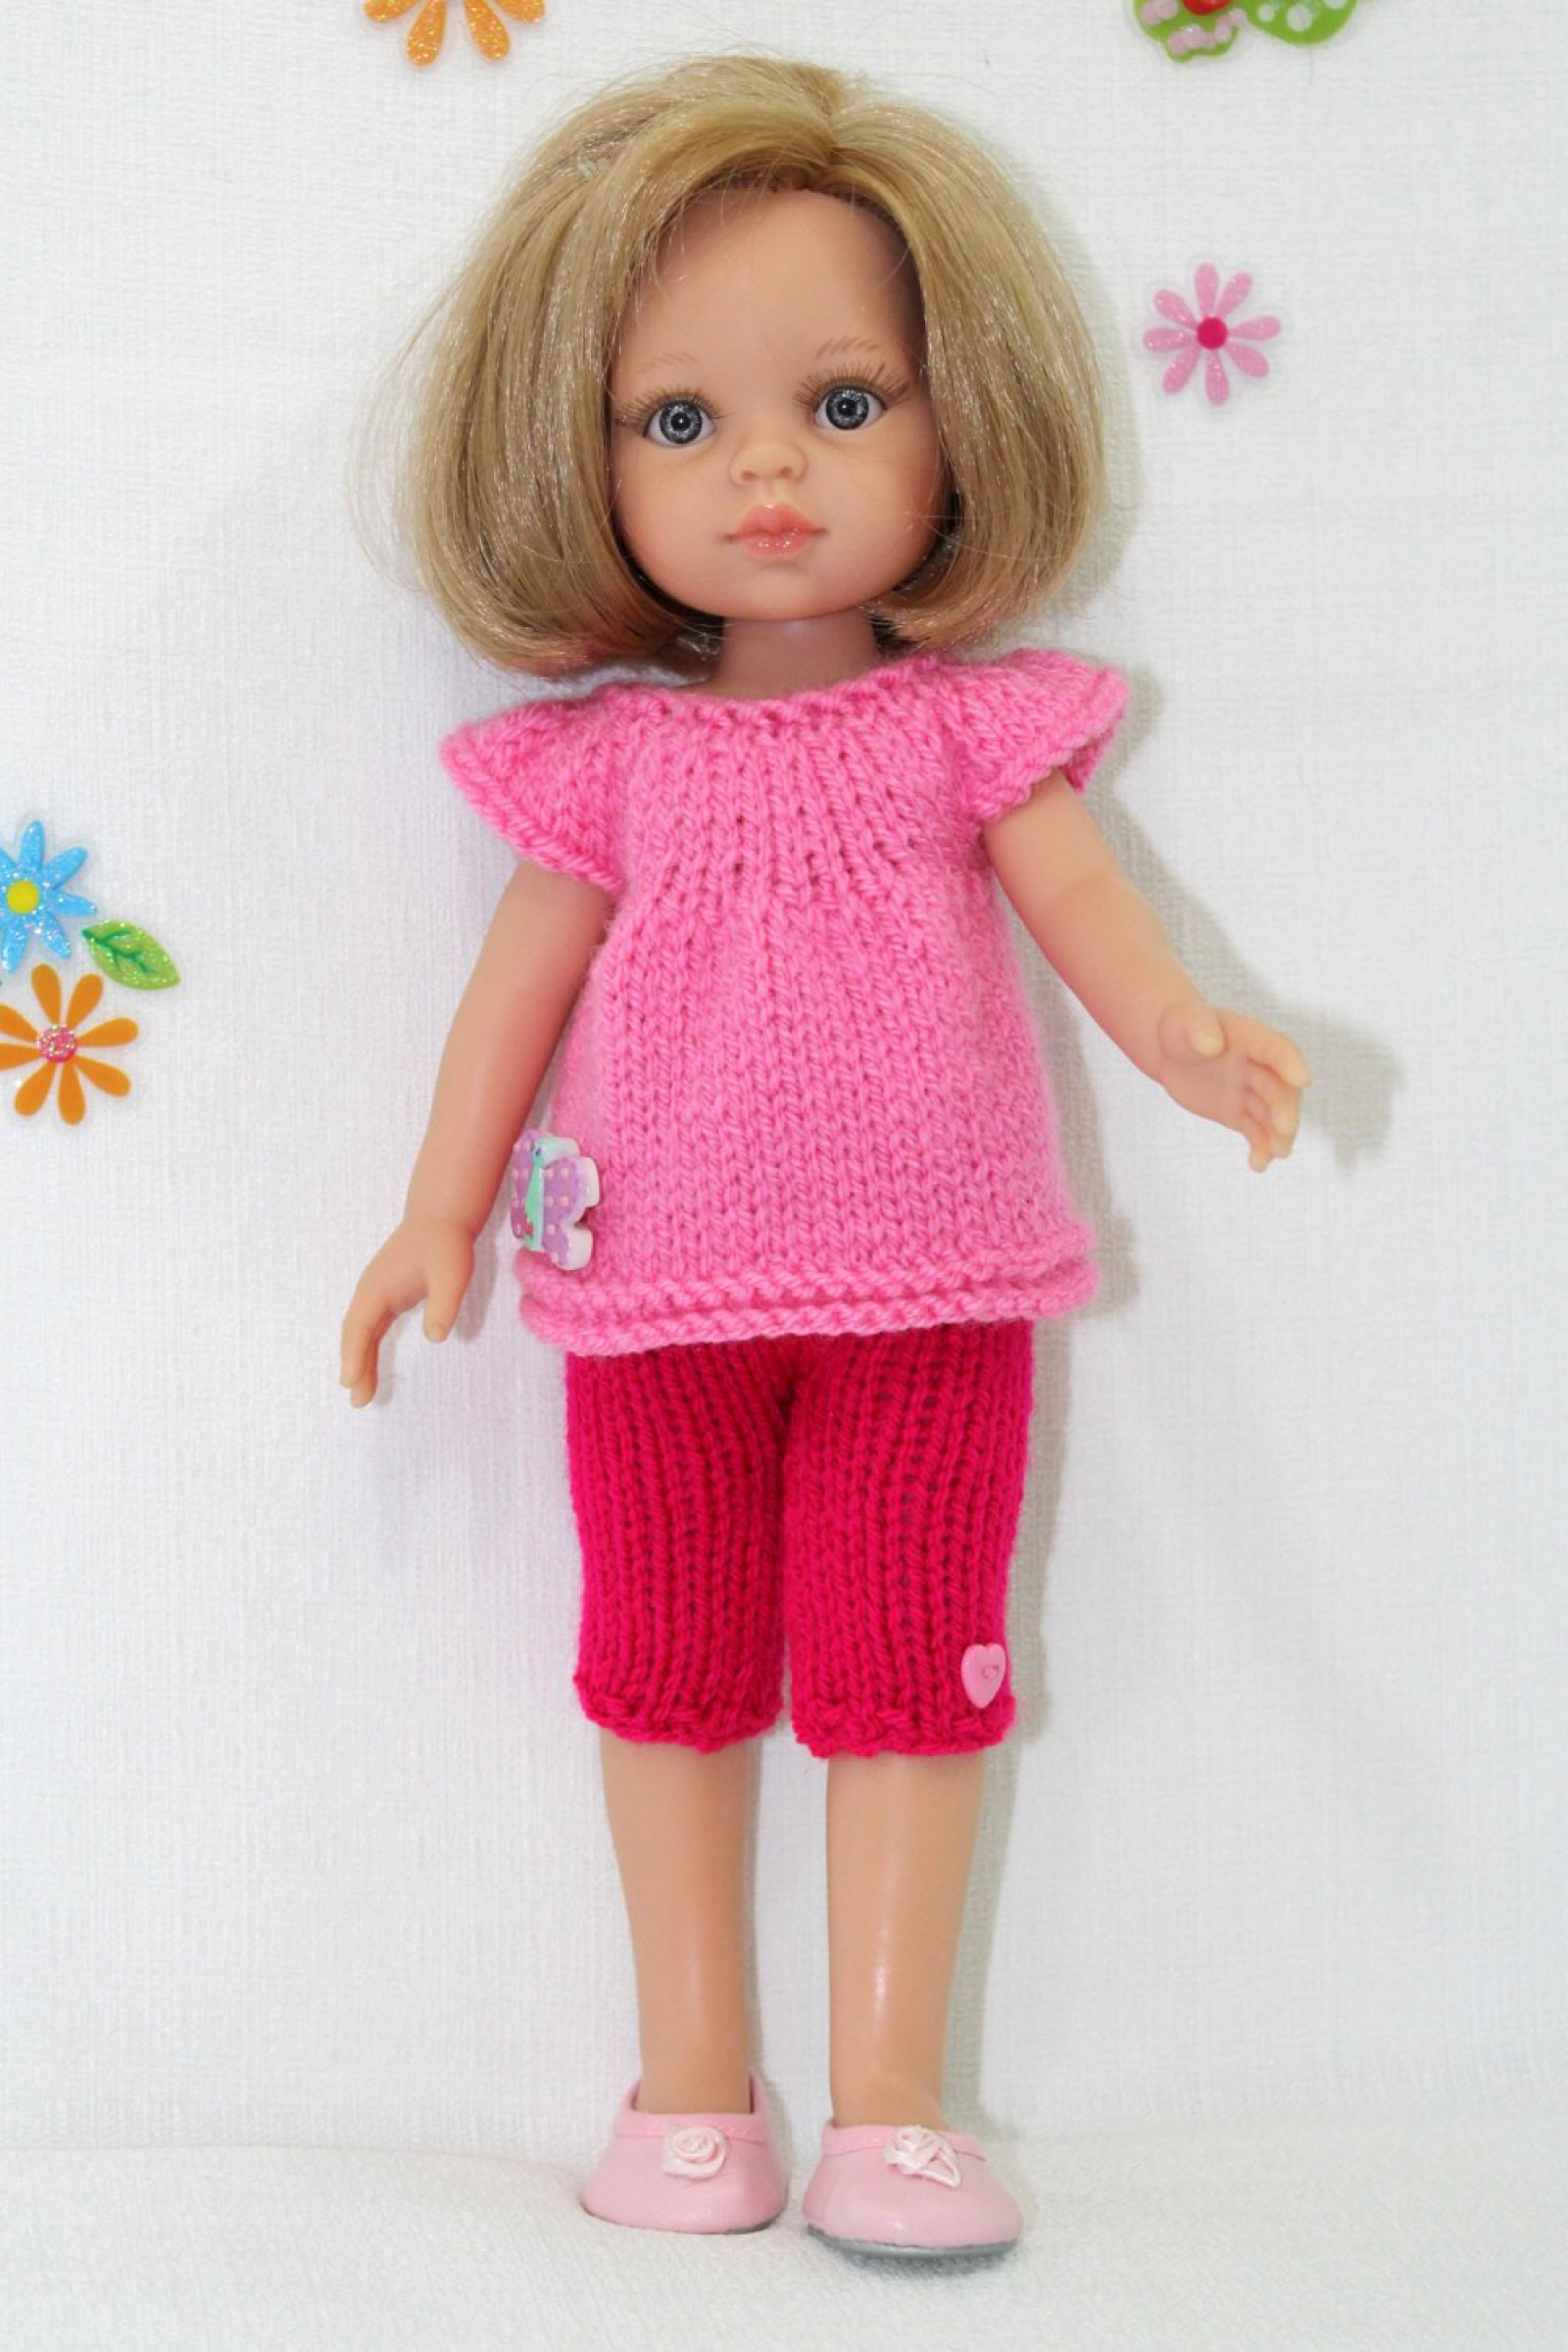 Paola Reina Sport Set of Clothes for Dolls 13 inch Corolle Les Cheries and sim 